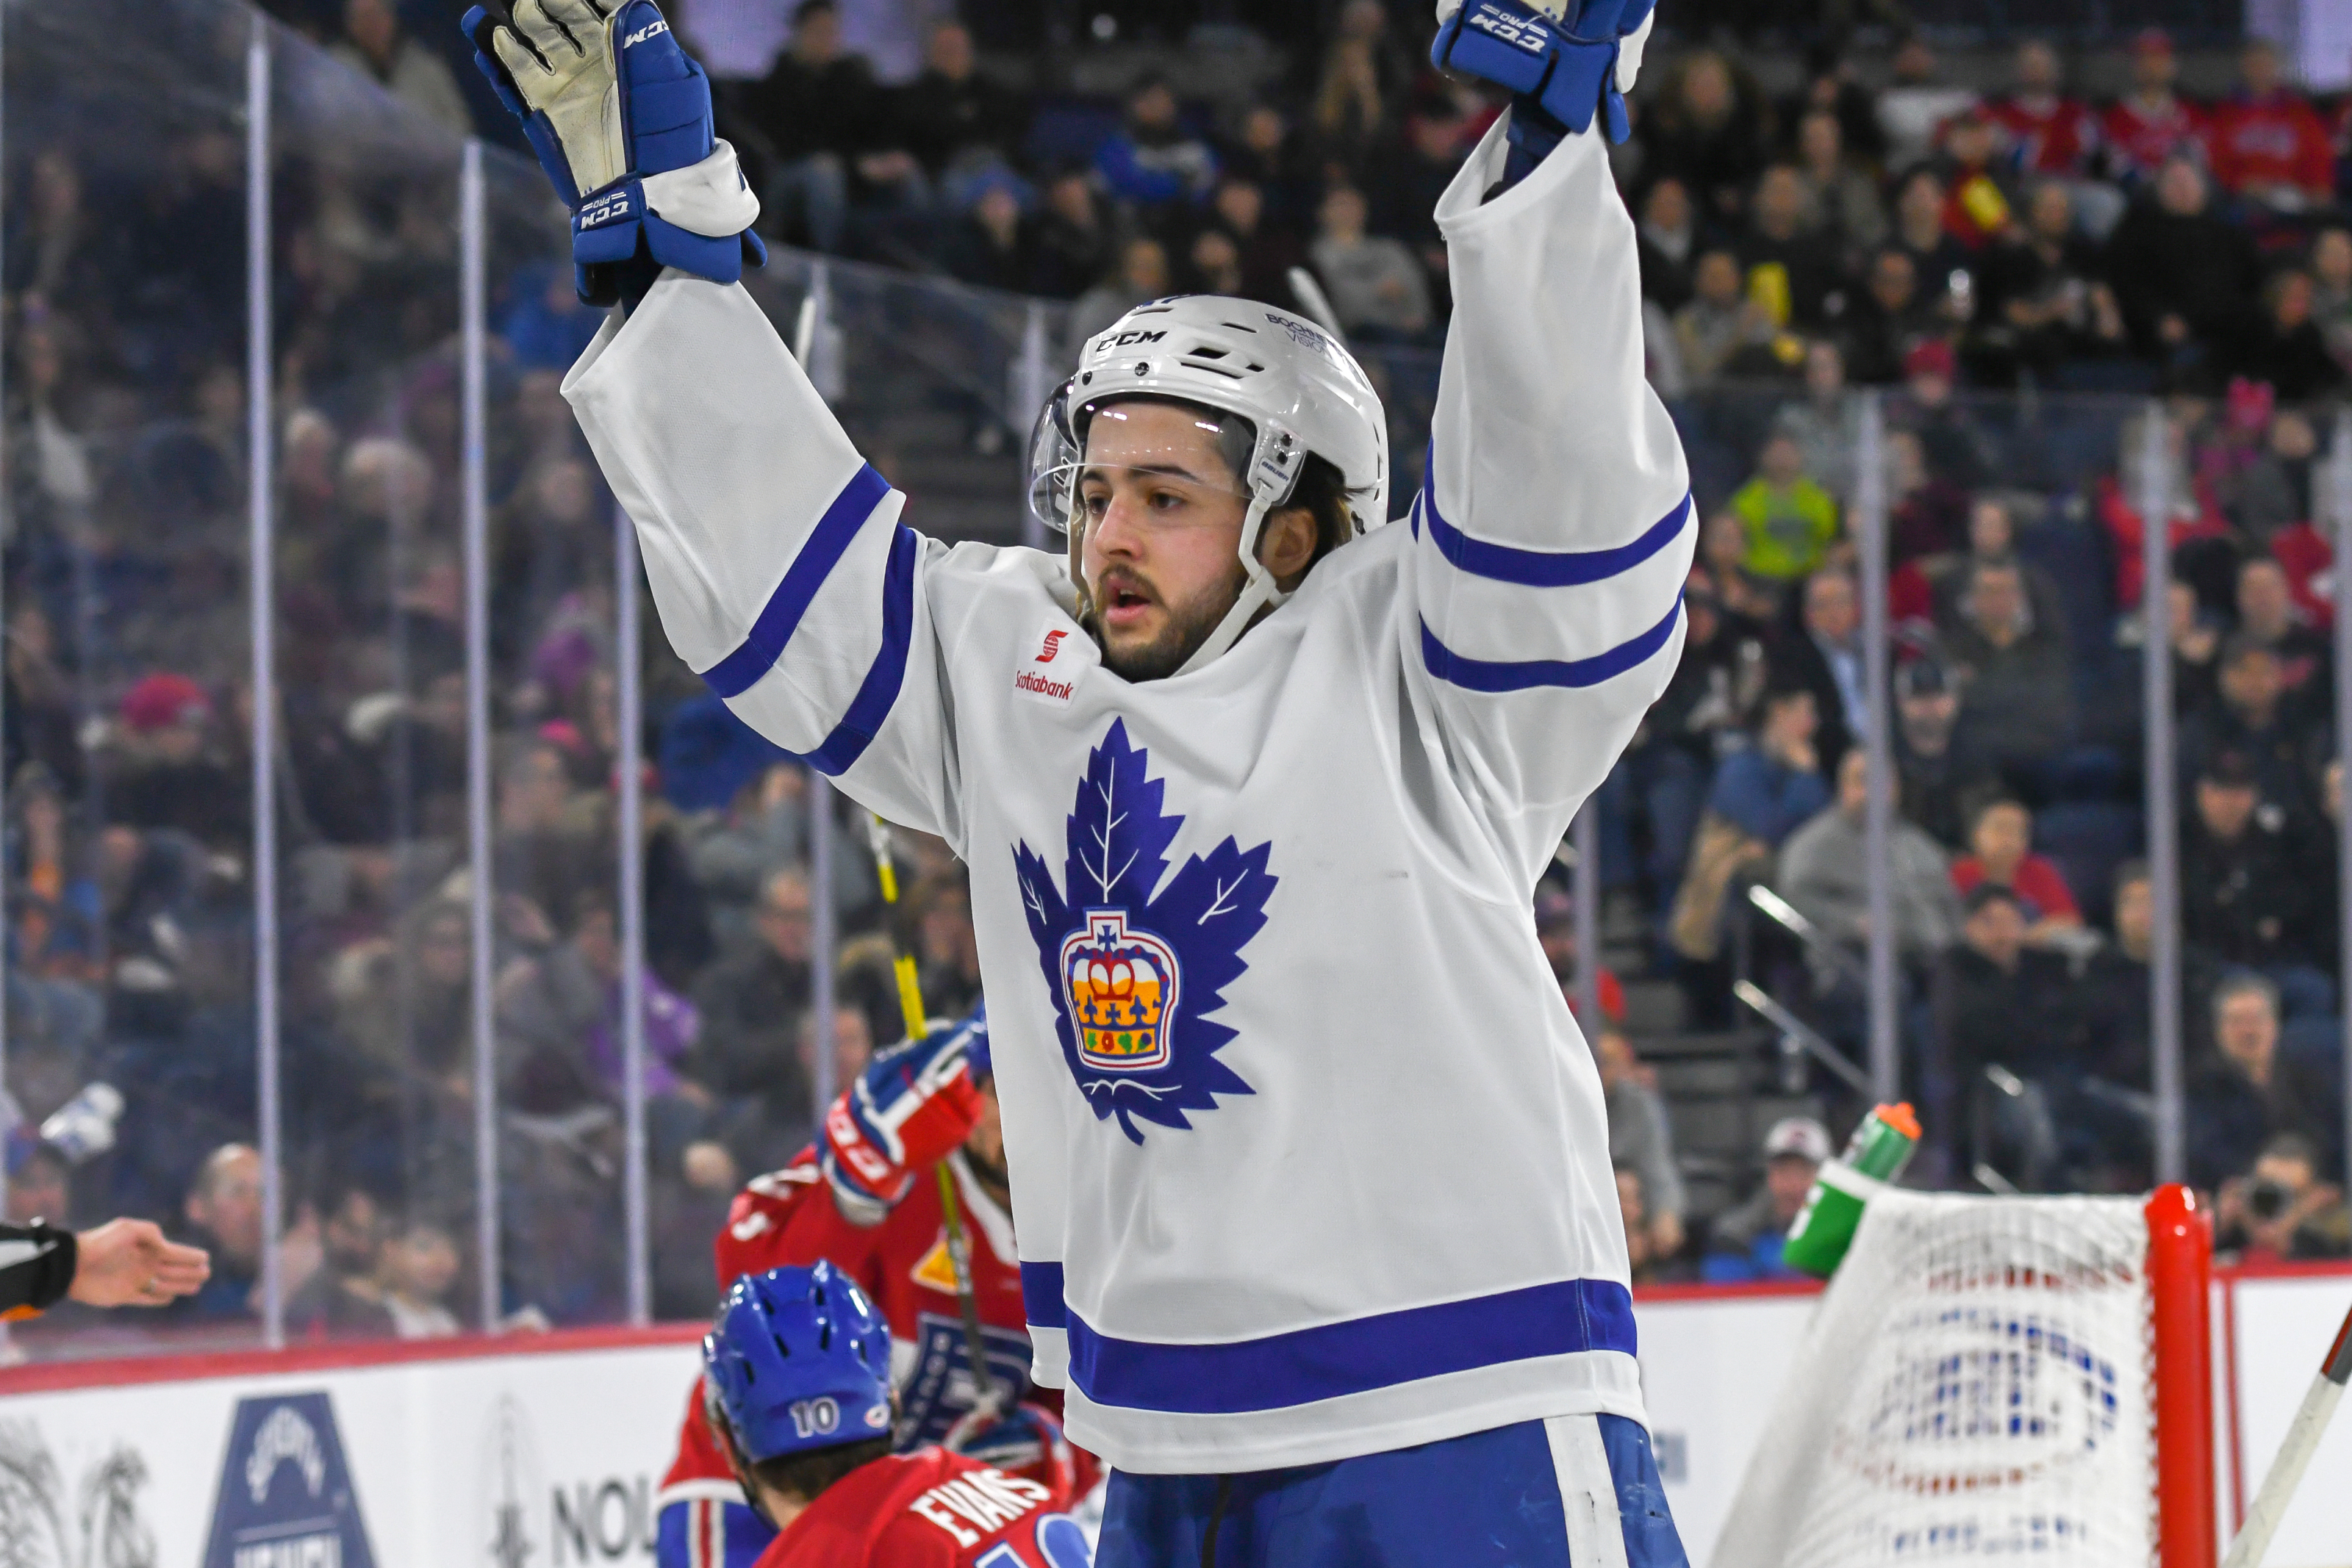 Toronto Marlies: 2019-20 Season Review and a look ahead to 2021